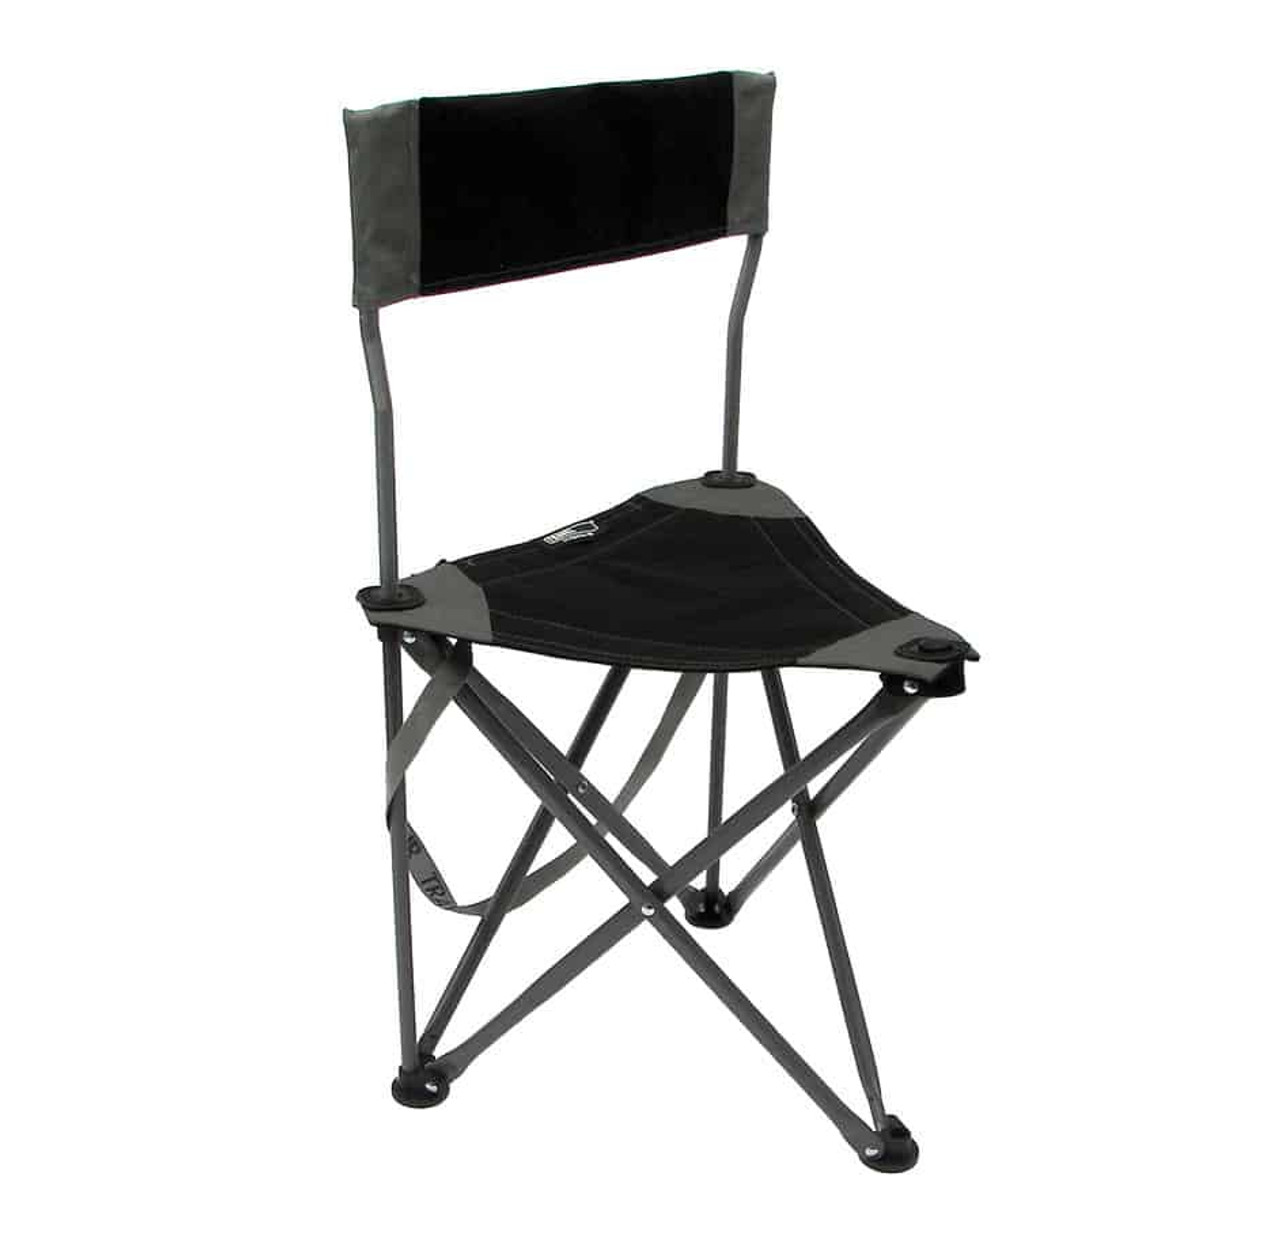 TravelChair Ultimate Slacker 2.0 Camping Chair